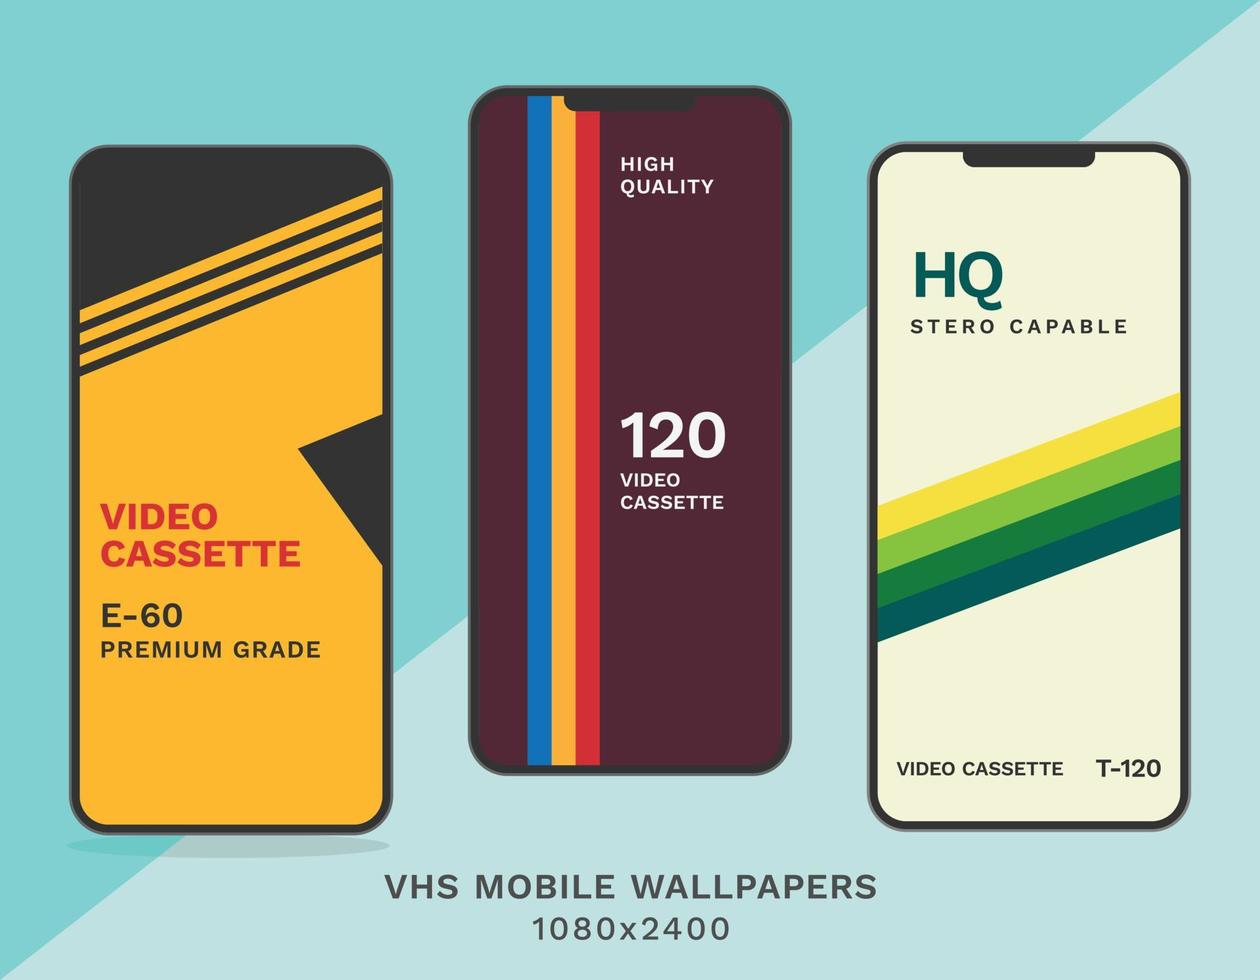 set of three vhs cassette style wallpapers for mobile 90s 80s retro nostalgia wallpapers vector